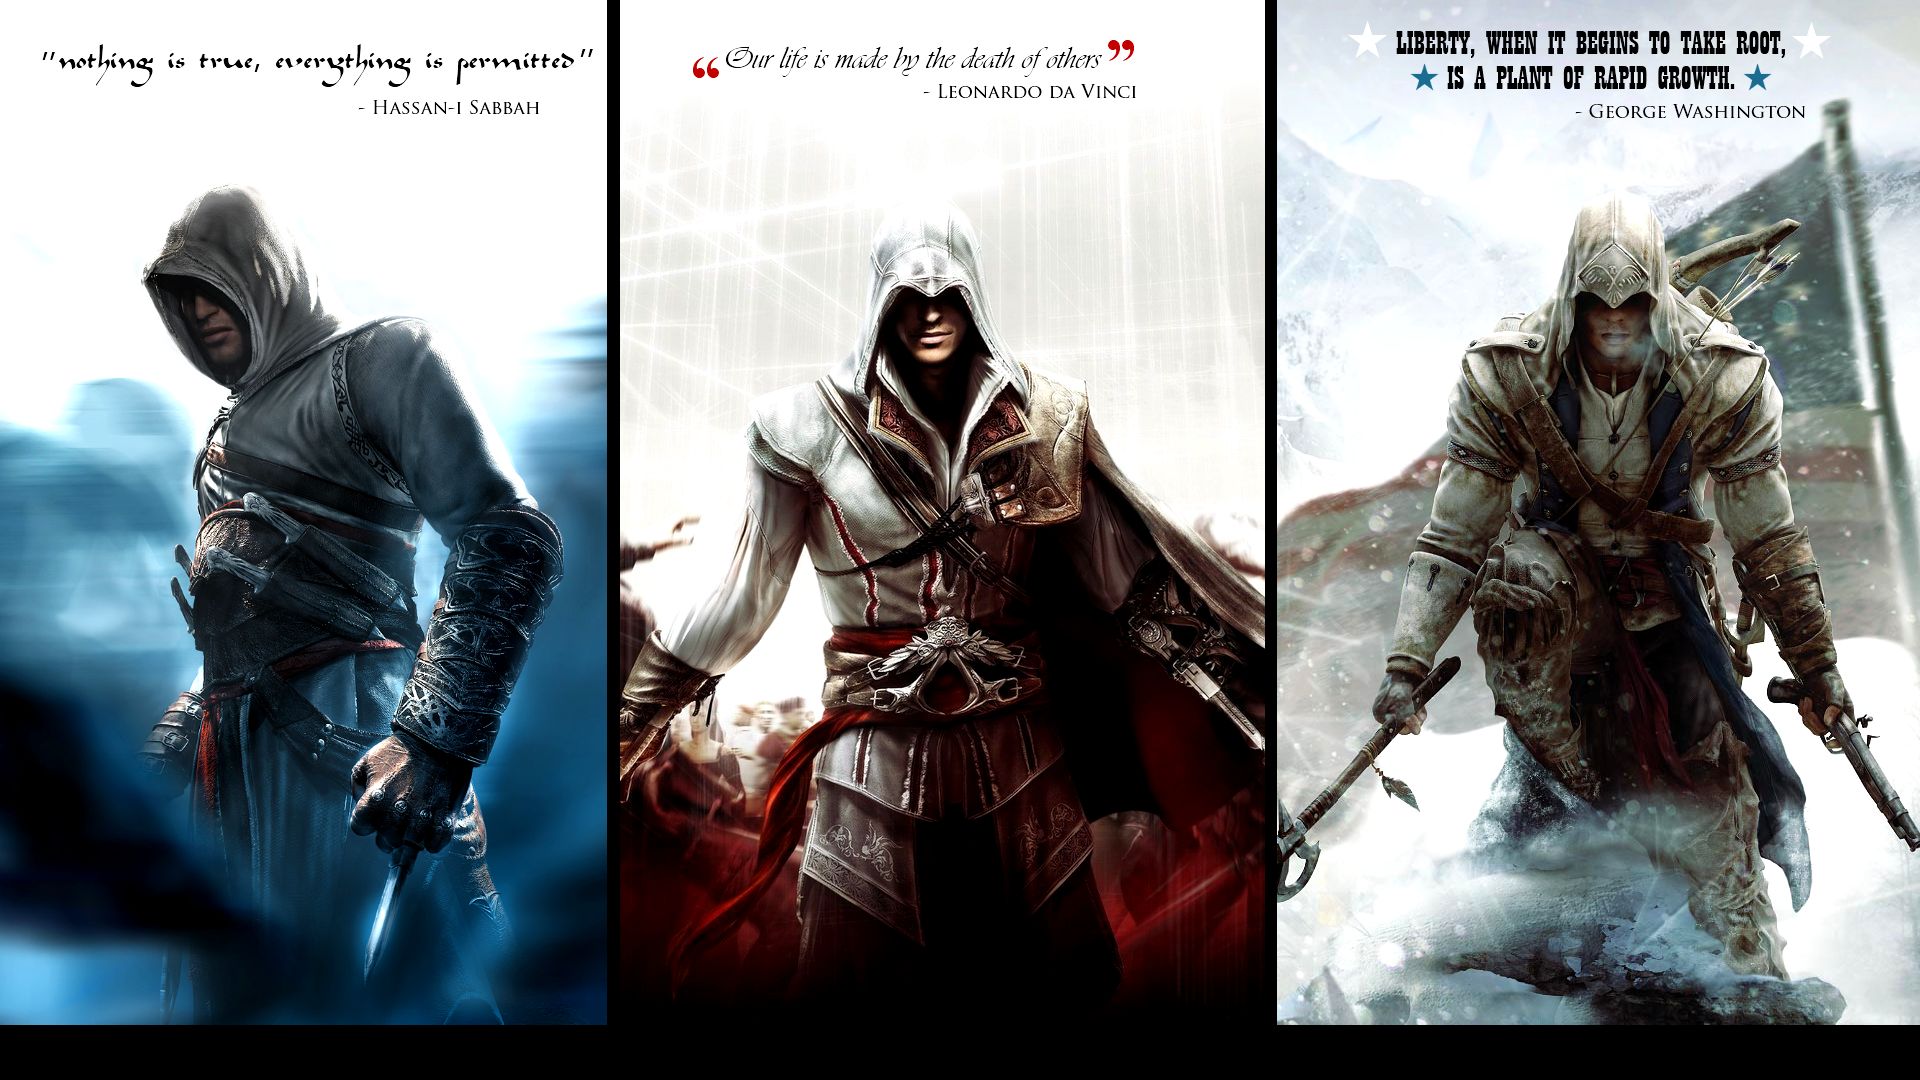  Assassin's Creed HD Android Wallpapers